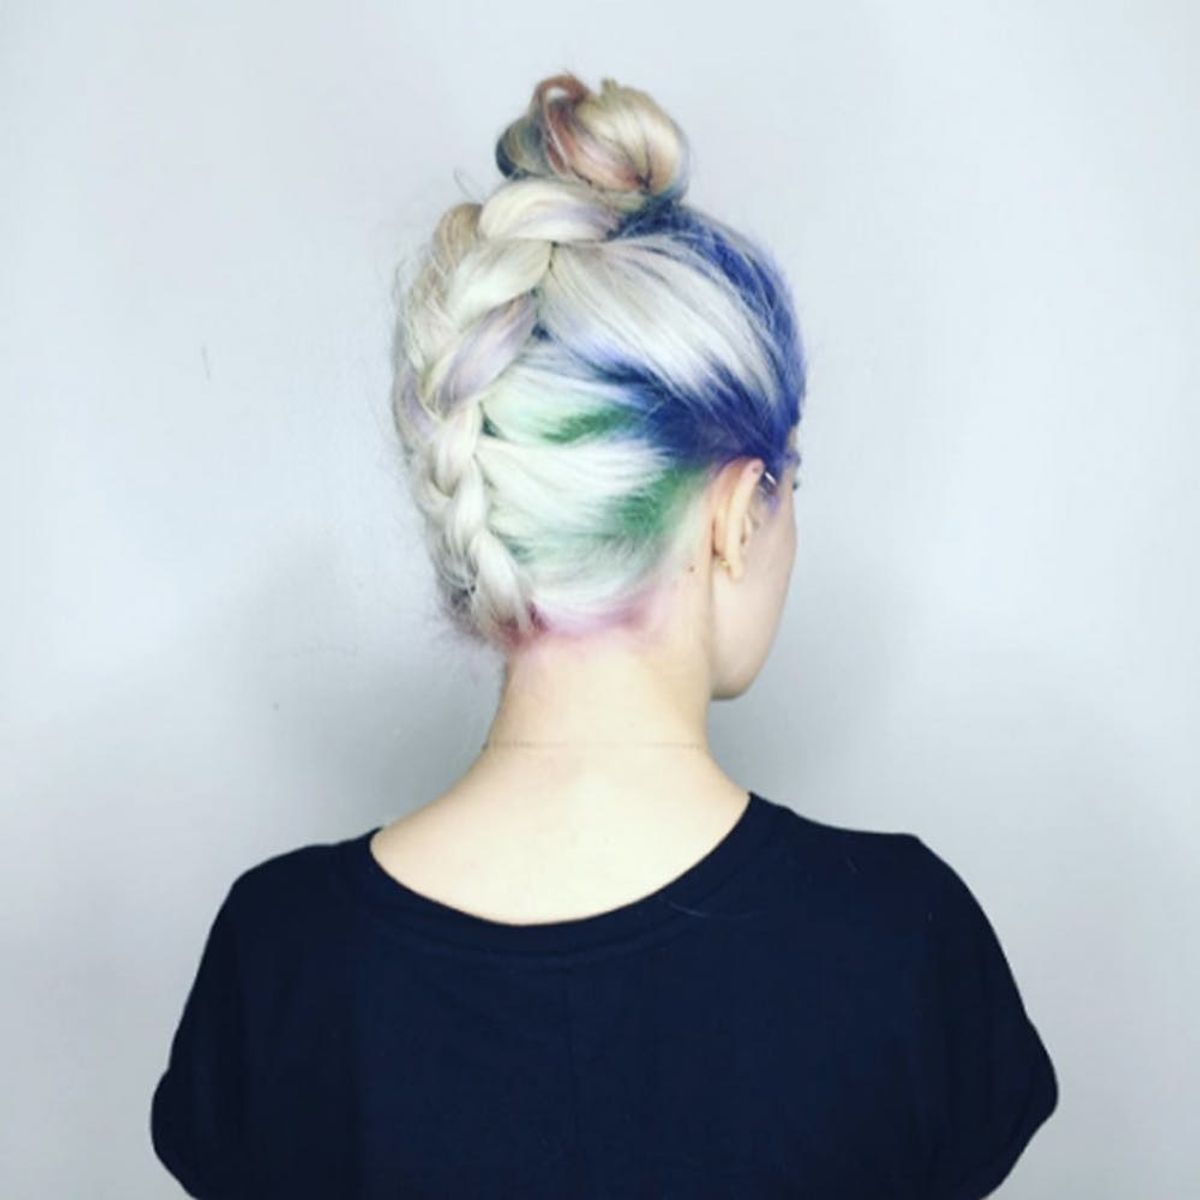 10 Rainbow Roots Hairstyles That Will Inspire You to Embrace *All* the Colors